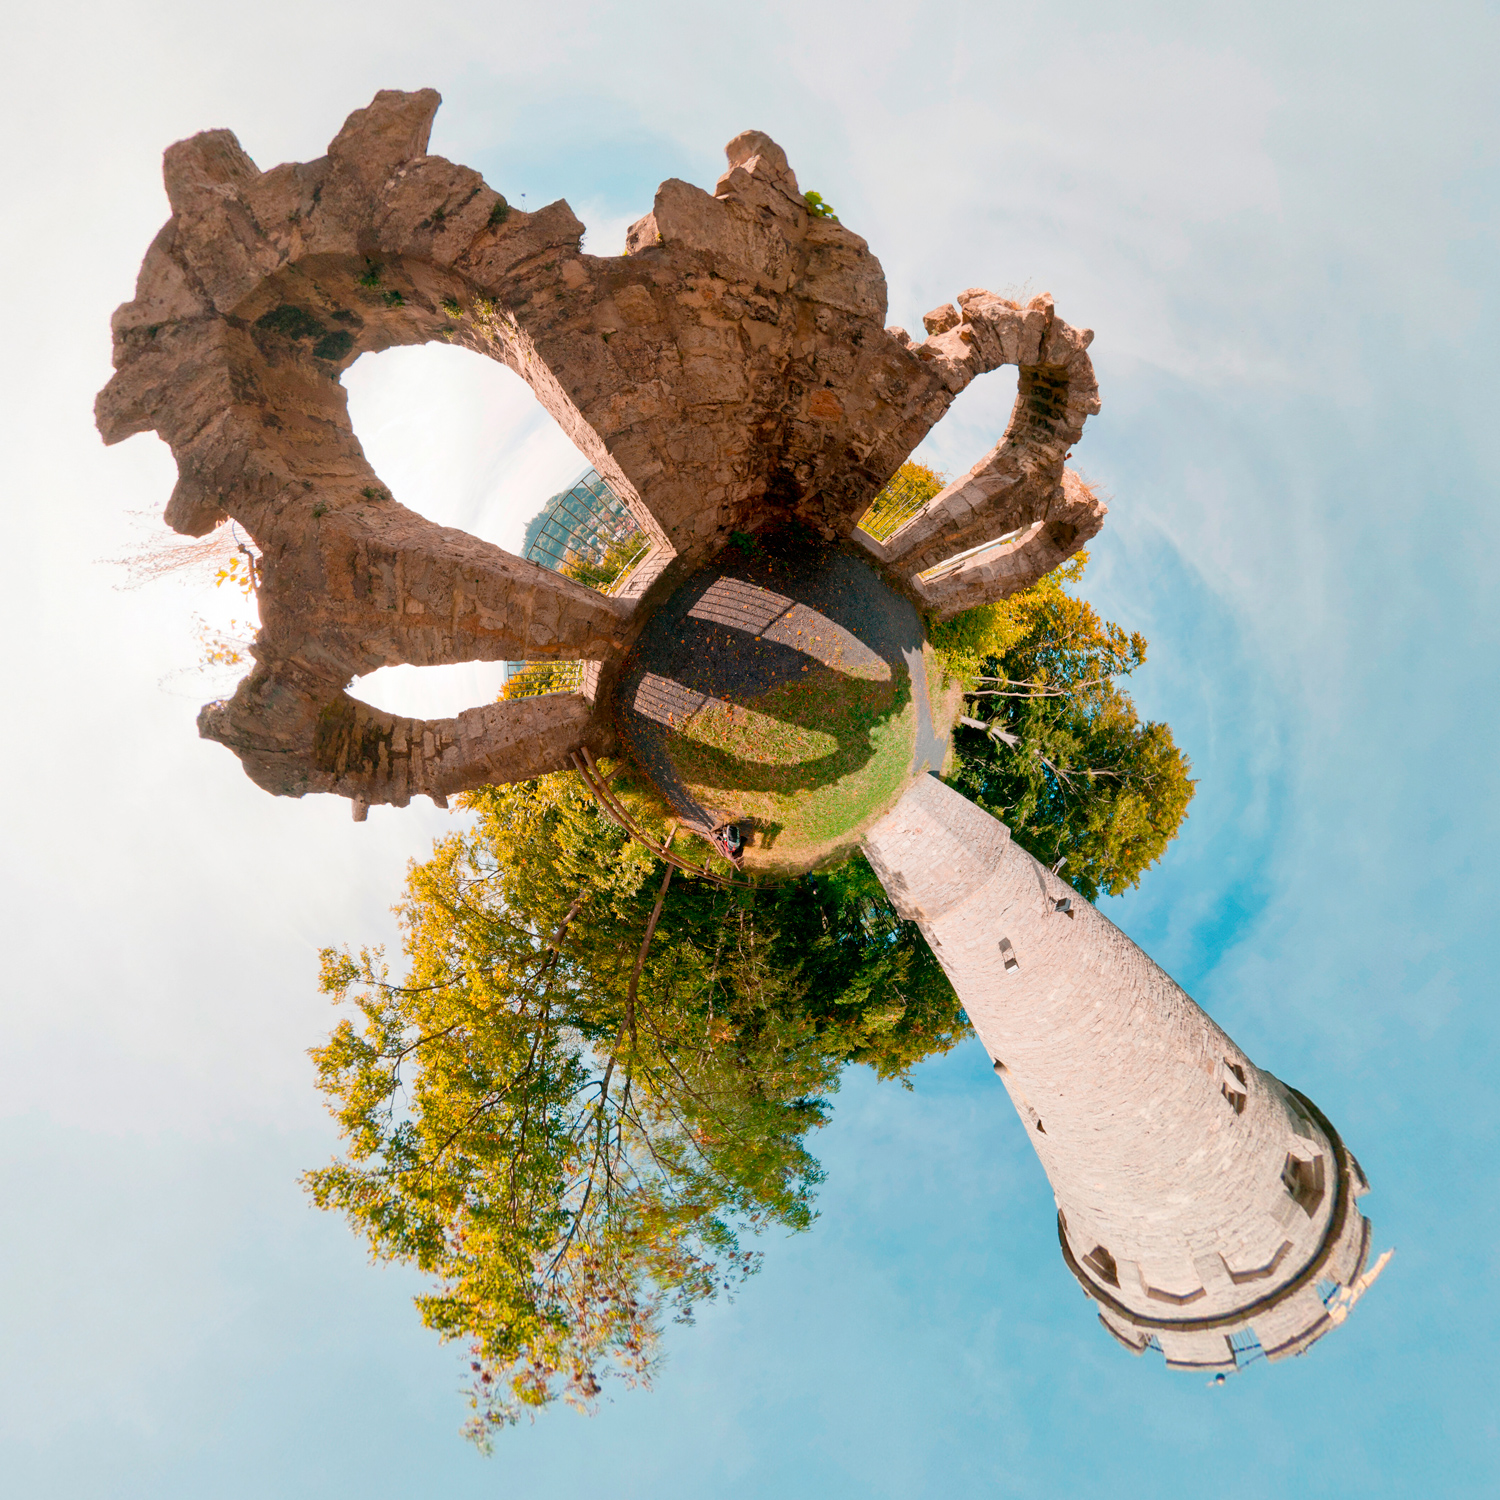 Panorama 181 - Little Planet